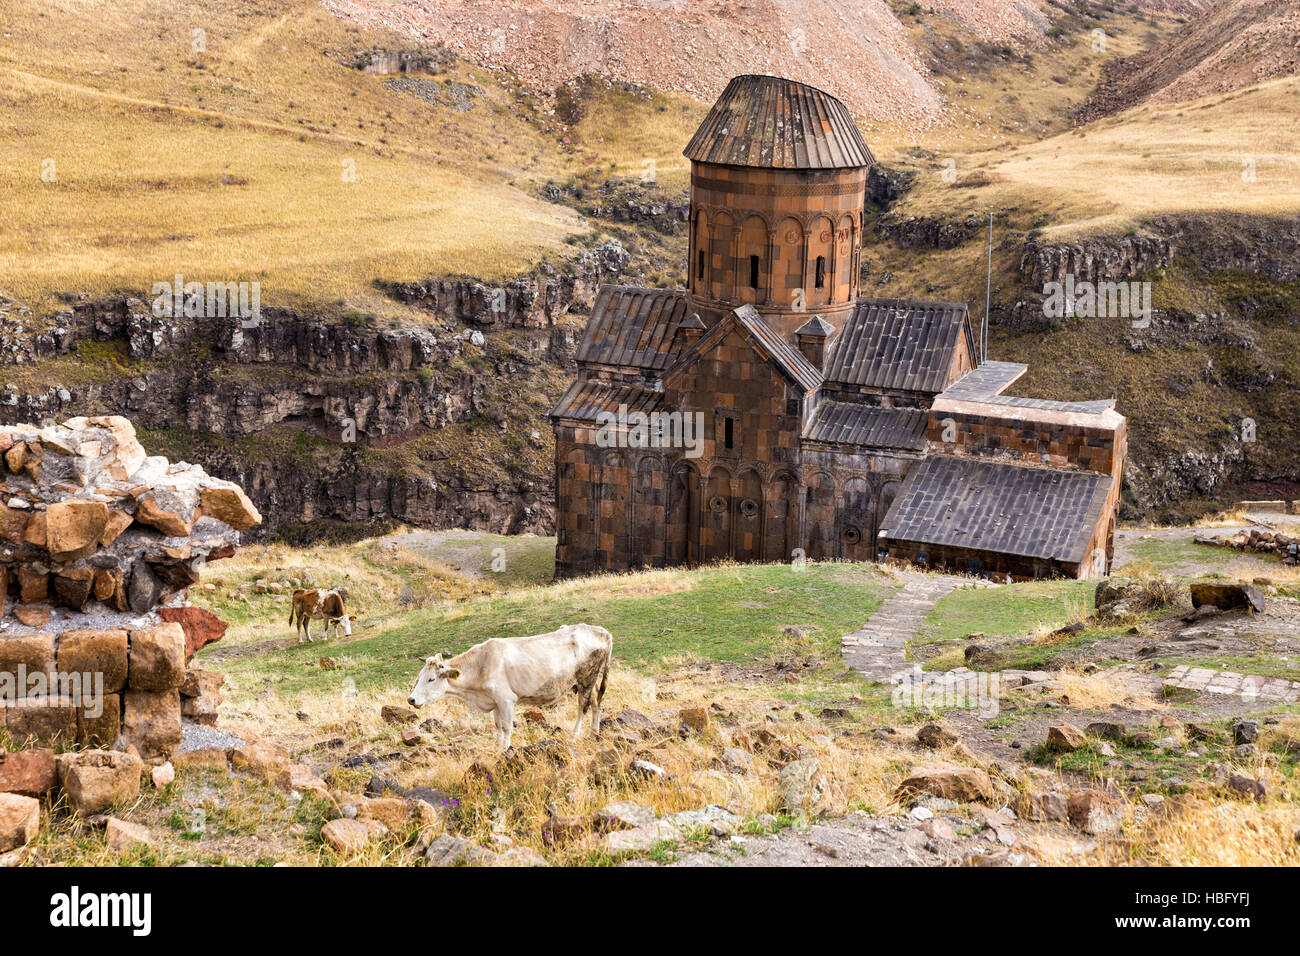 View of Saint Gregory of Tigran Honents in Ani. Ani is a ruined medieval Armenian city situated in the Turkish province Kars. Stock Photo